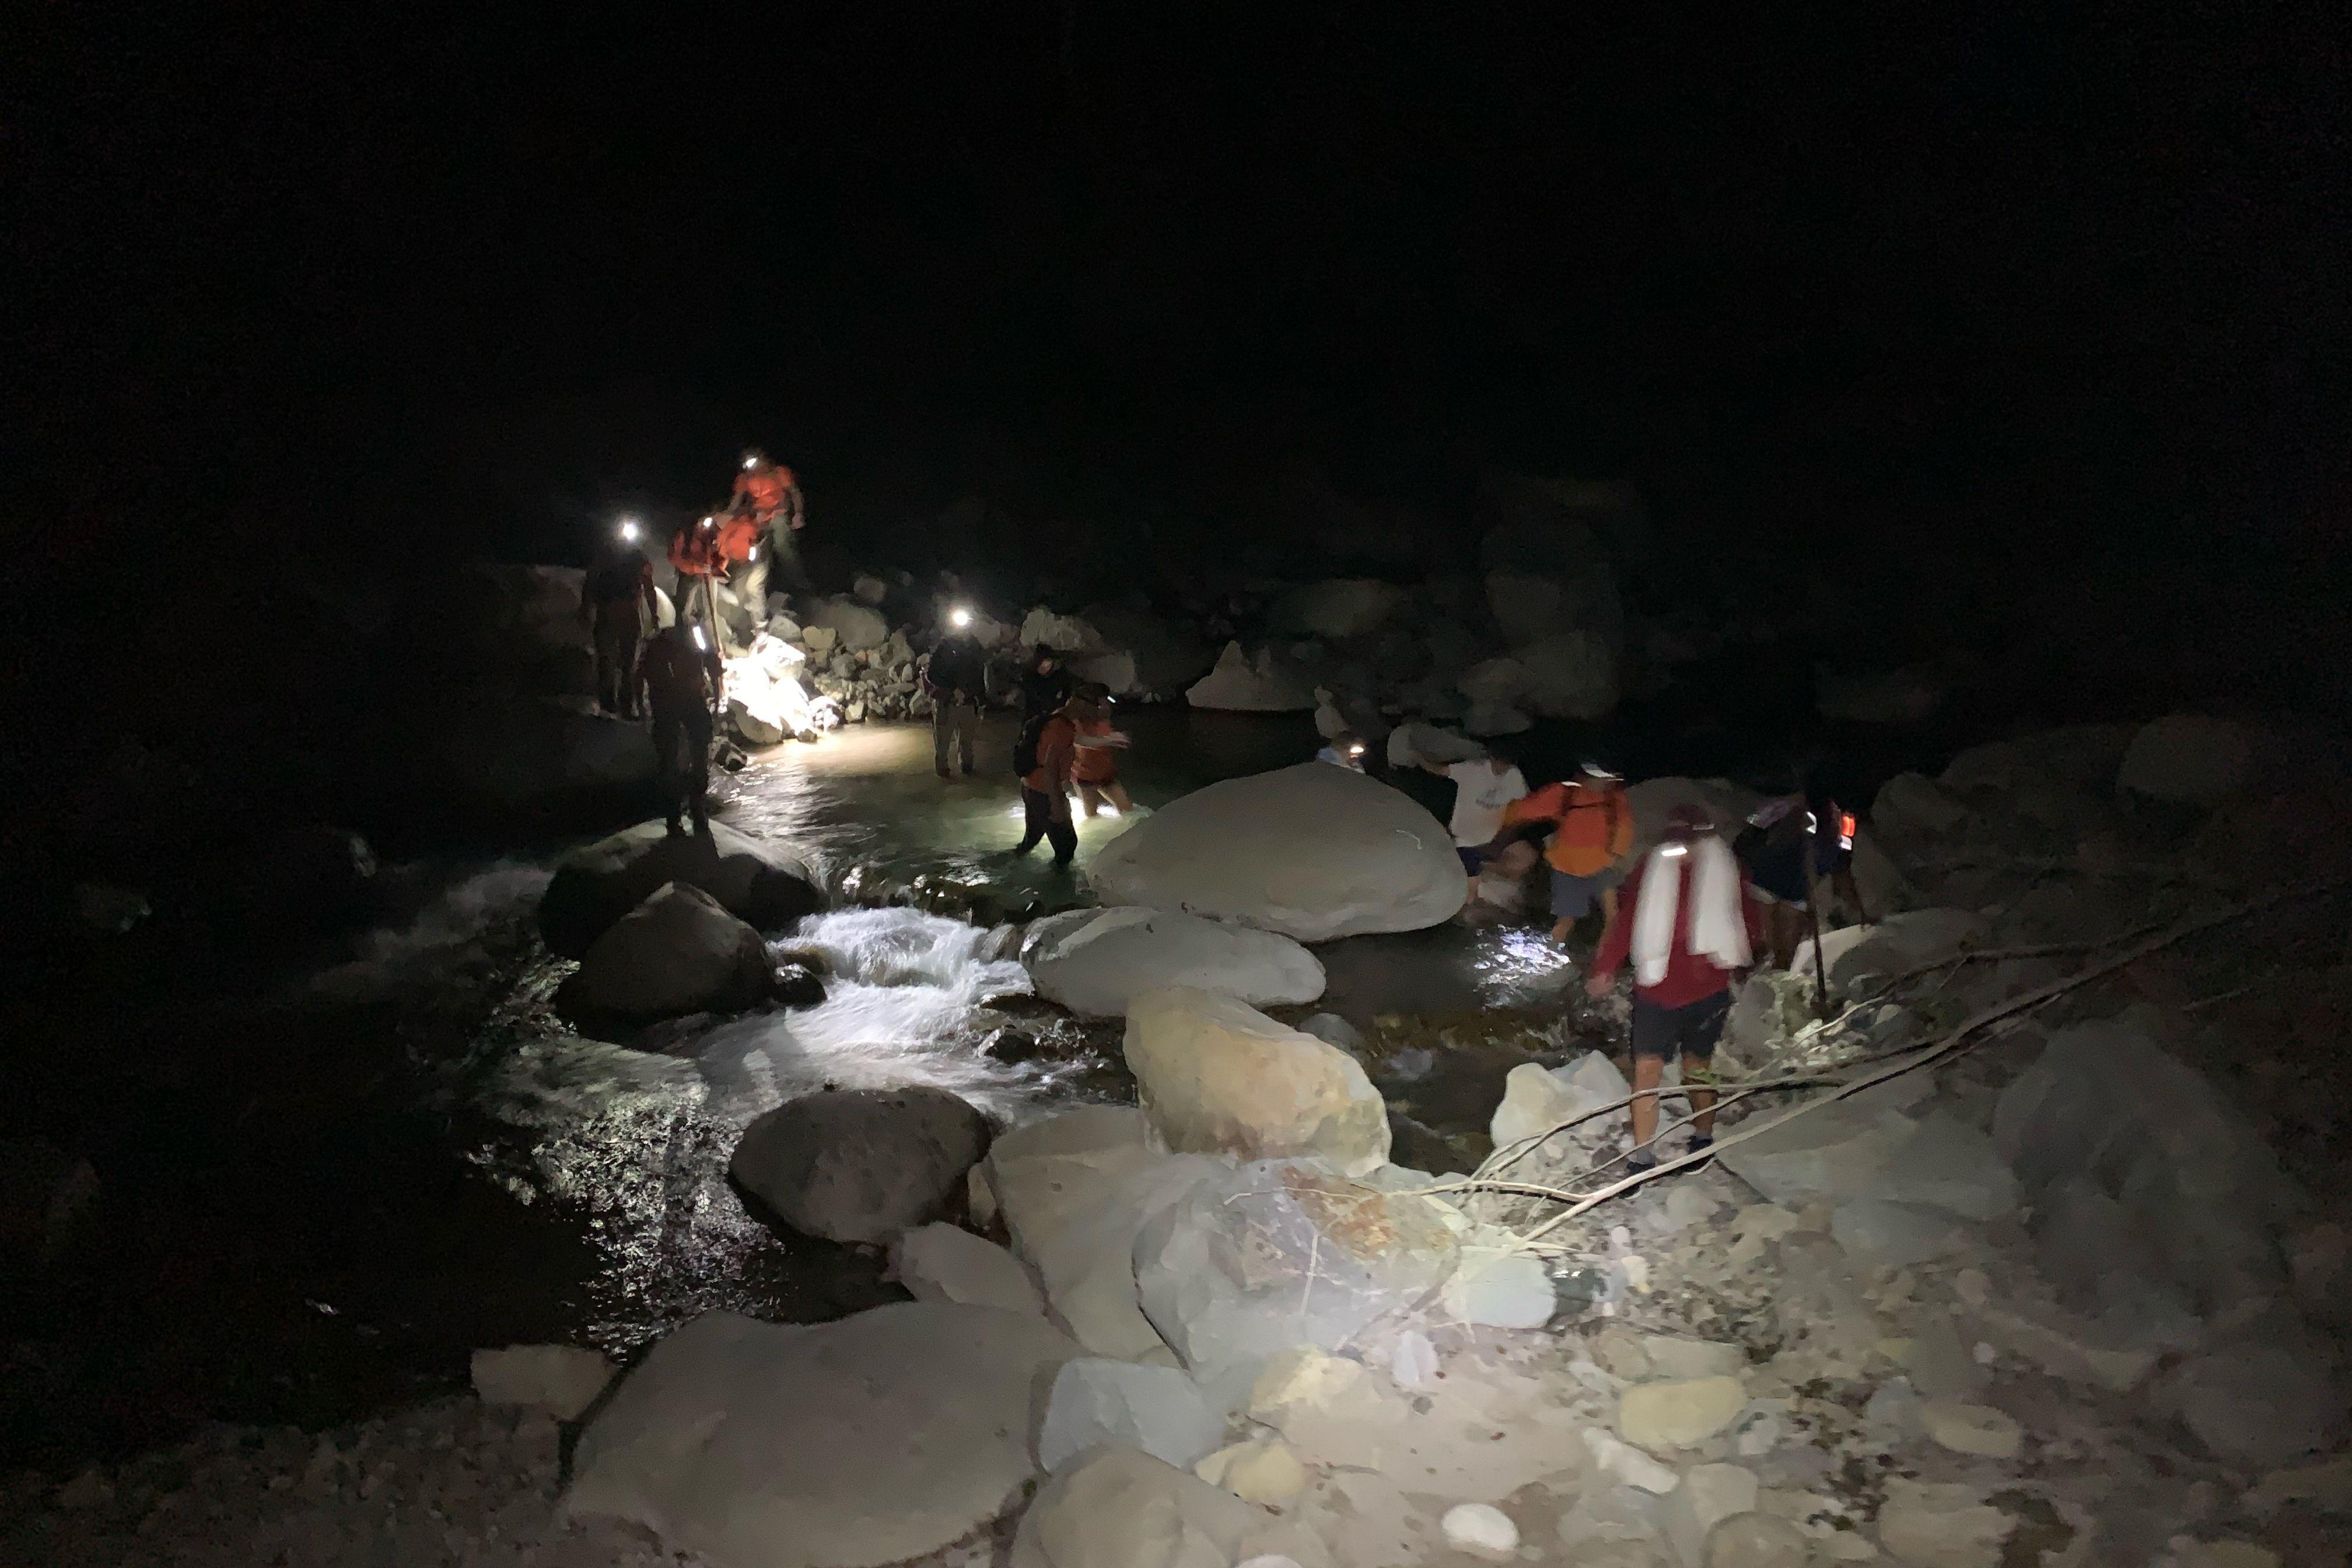 Image courtesy of&amp;nbsp;Ventura County Sheriff&#039;s Office - iPhone&#039;s Emergency SOS saves 10 hikers from &quot;Last Chance&quot; canyon